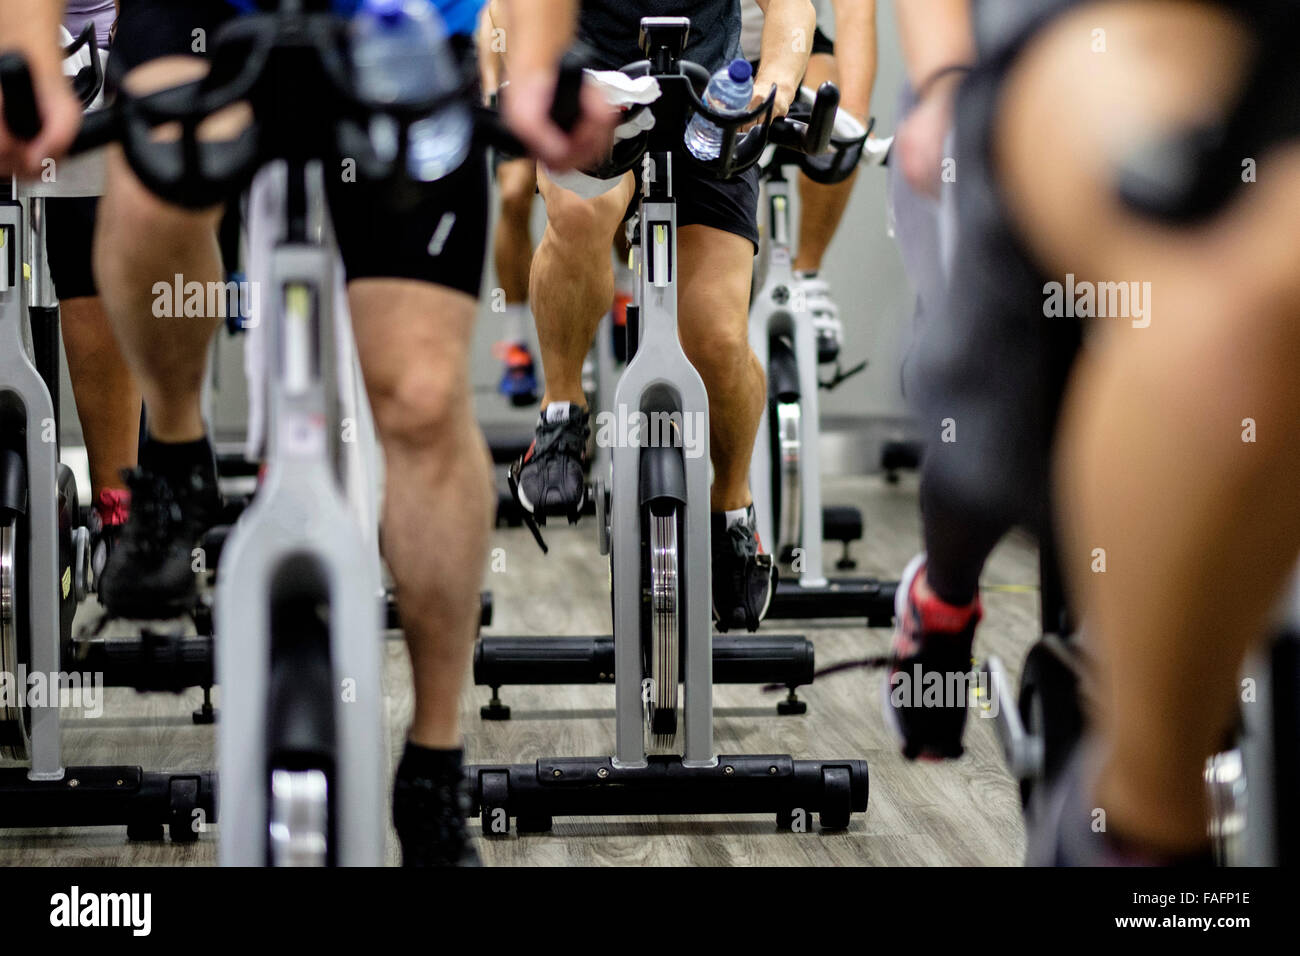 People riding stationary bicycles during a spinning class at the gym Stock Photo